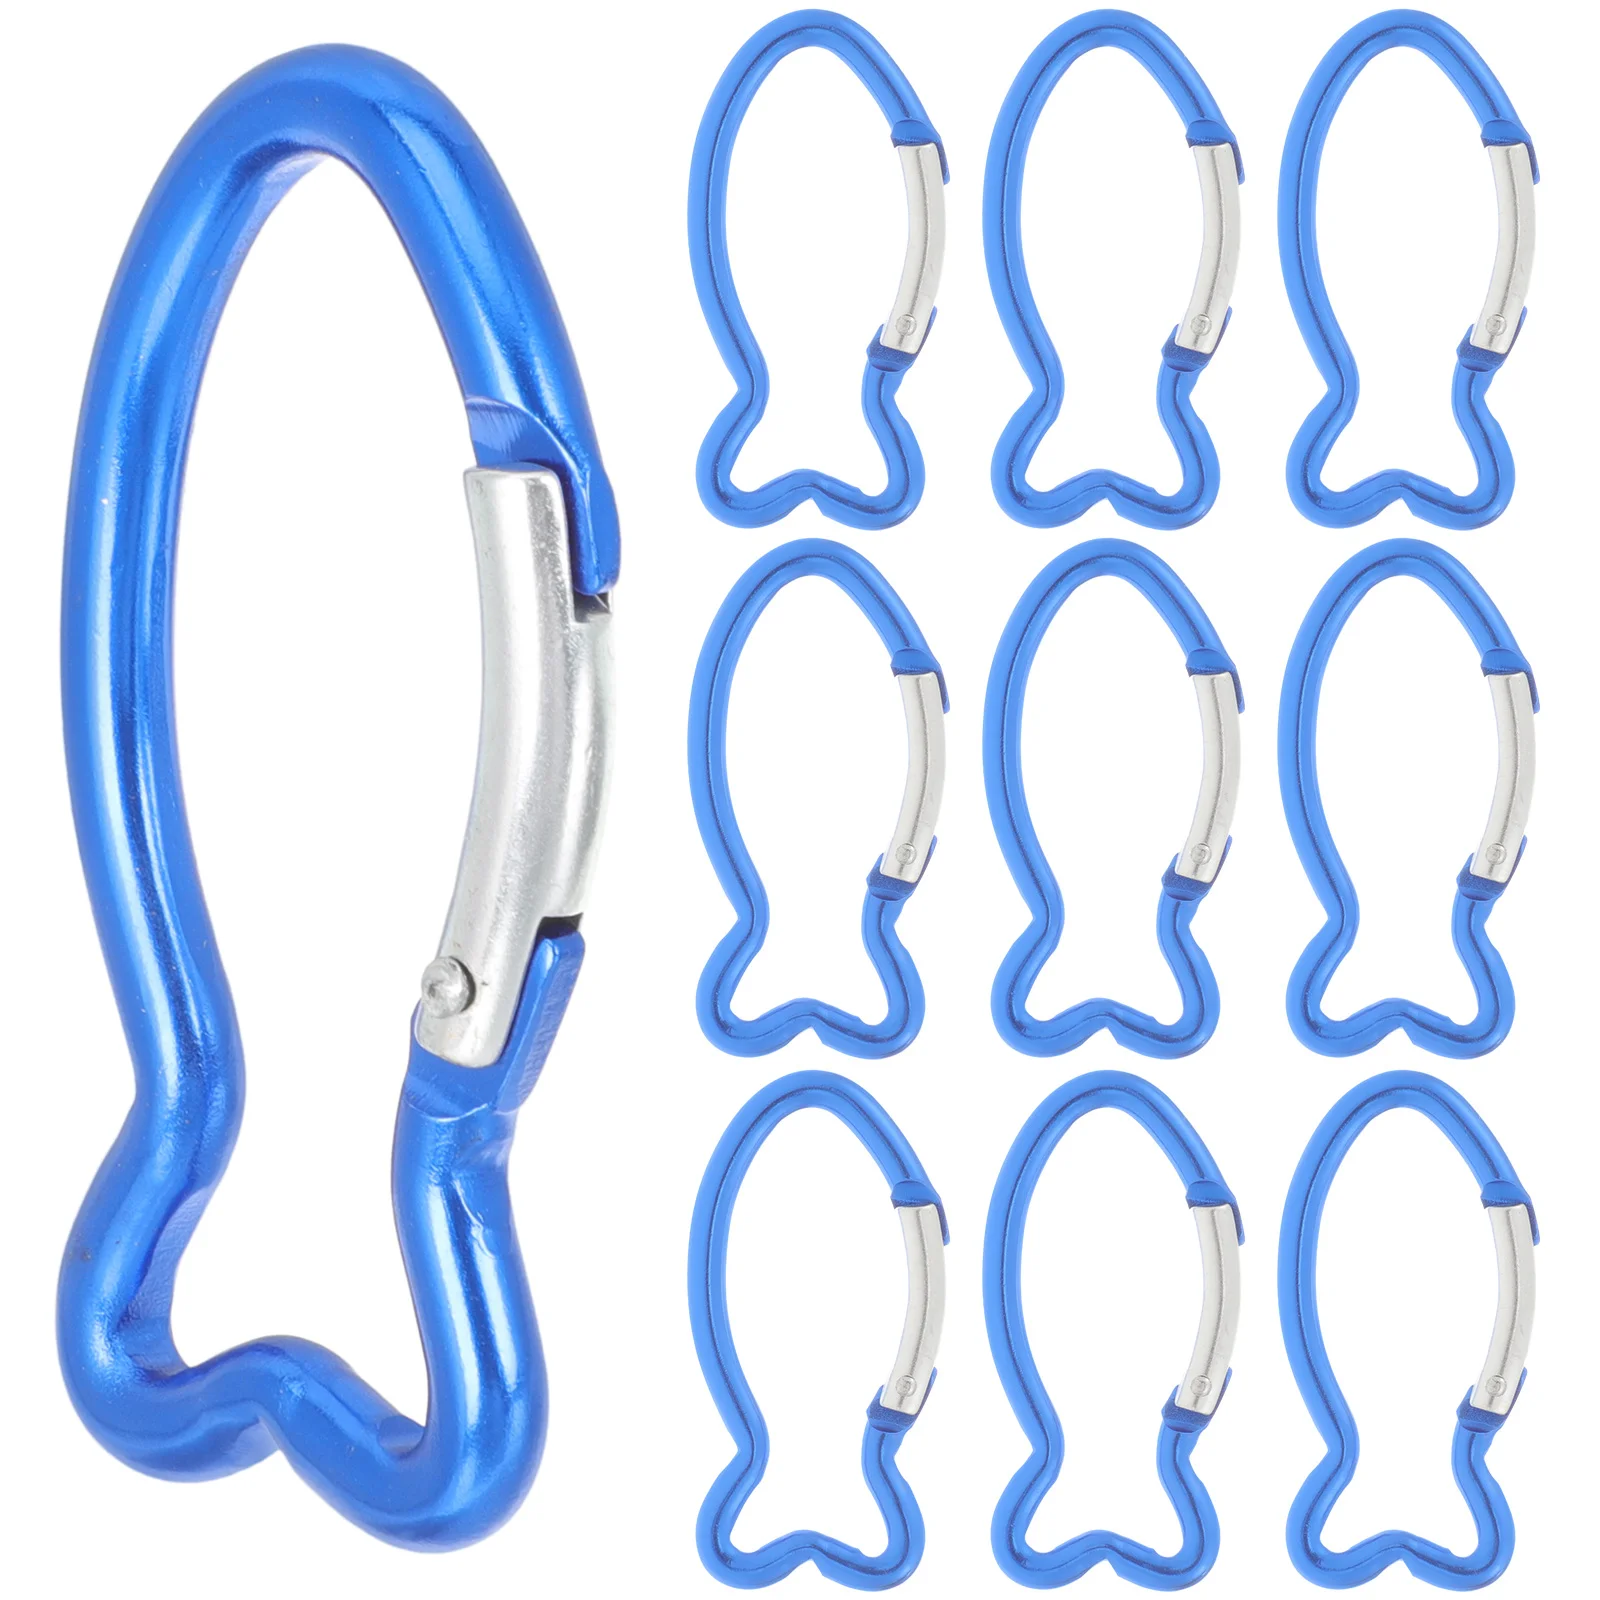 

Carabiner Climbing Clip Carabiners Locking Camping Hook Ring Hammock Lock Snap Spring Mini Caribeaners Accessories Clips Outdoor